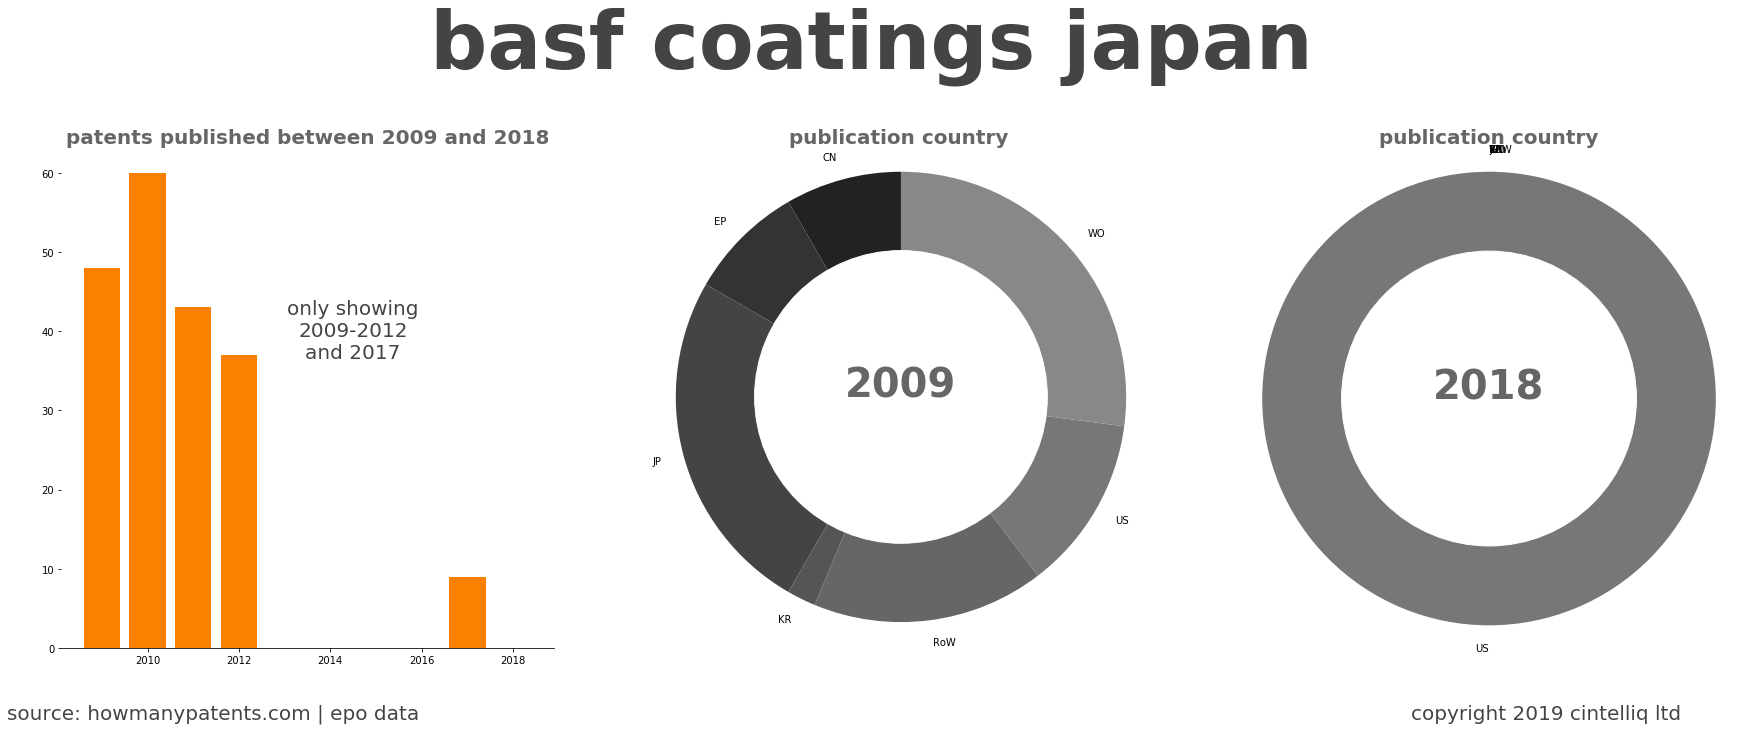 summary of patents for Basf Coatings Japan